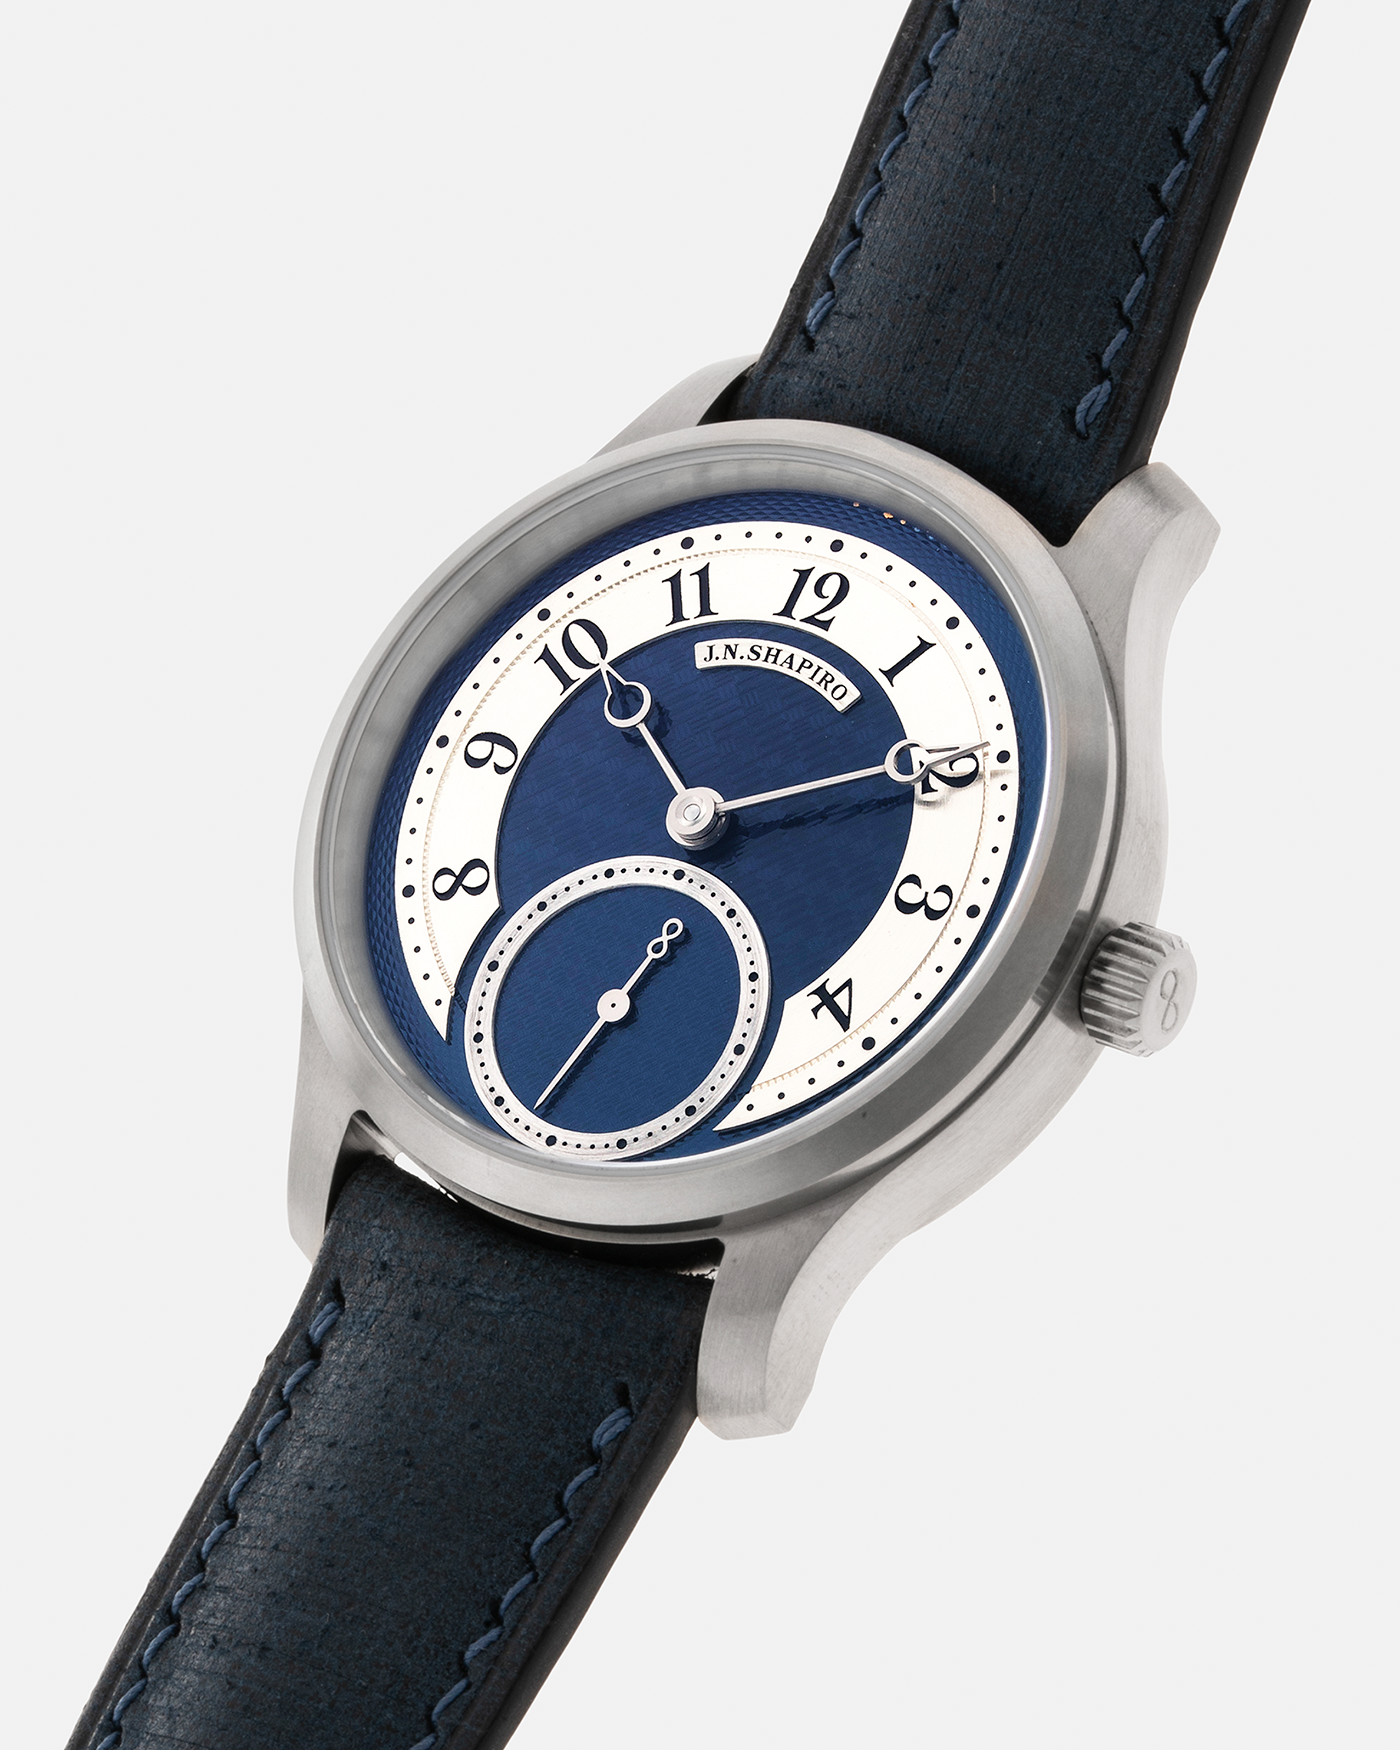 Brand: J.N. Shapiro Year: 2023 Model: Infinity Series Titanium Material: Titanium Case, Silver Dial, White Gold Hands Movement: UWD Cal. 33.1, Manual-Winding Case Dimensions: 39mm x 9.75mm Lug Width: 20mm Strap: J.N. Shapiro by Delugs Navy Blue Leather Strap with Signed Titanium Tang Buckle